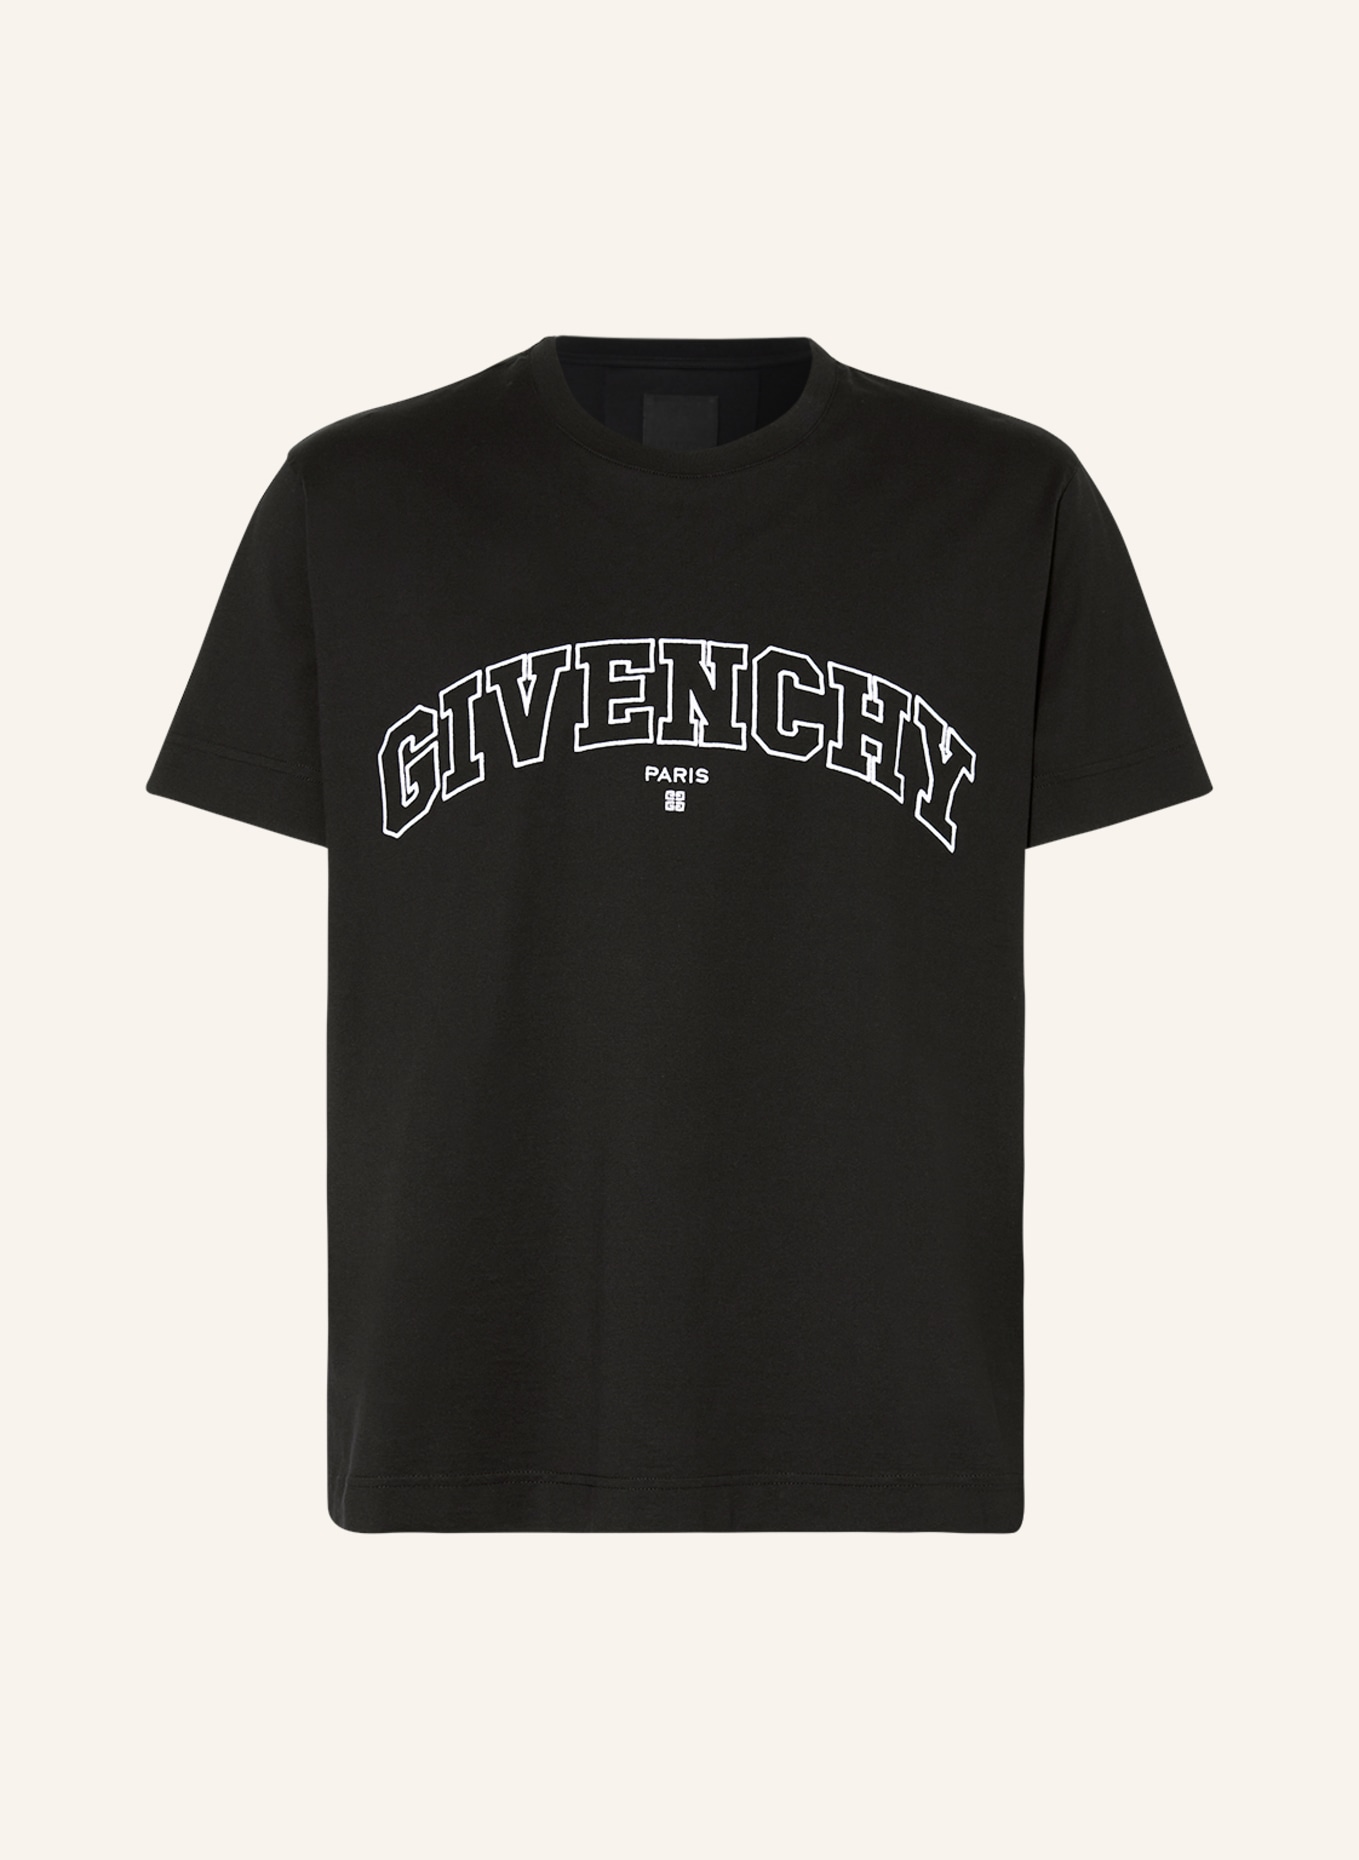 GIVENCHY T-shirt in black